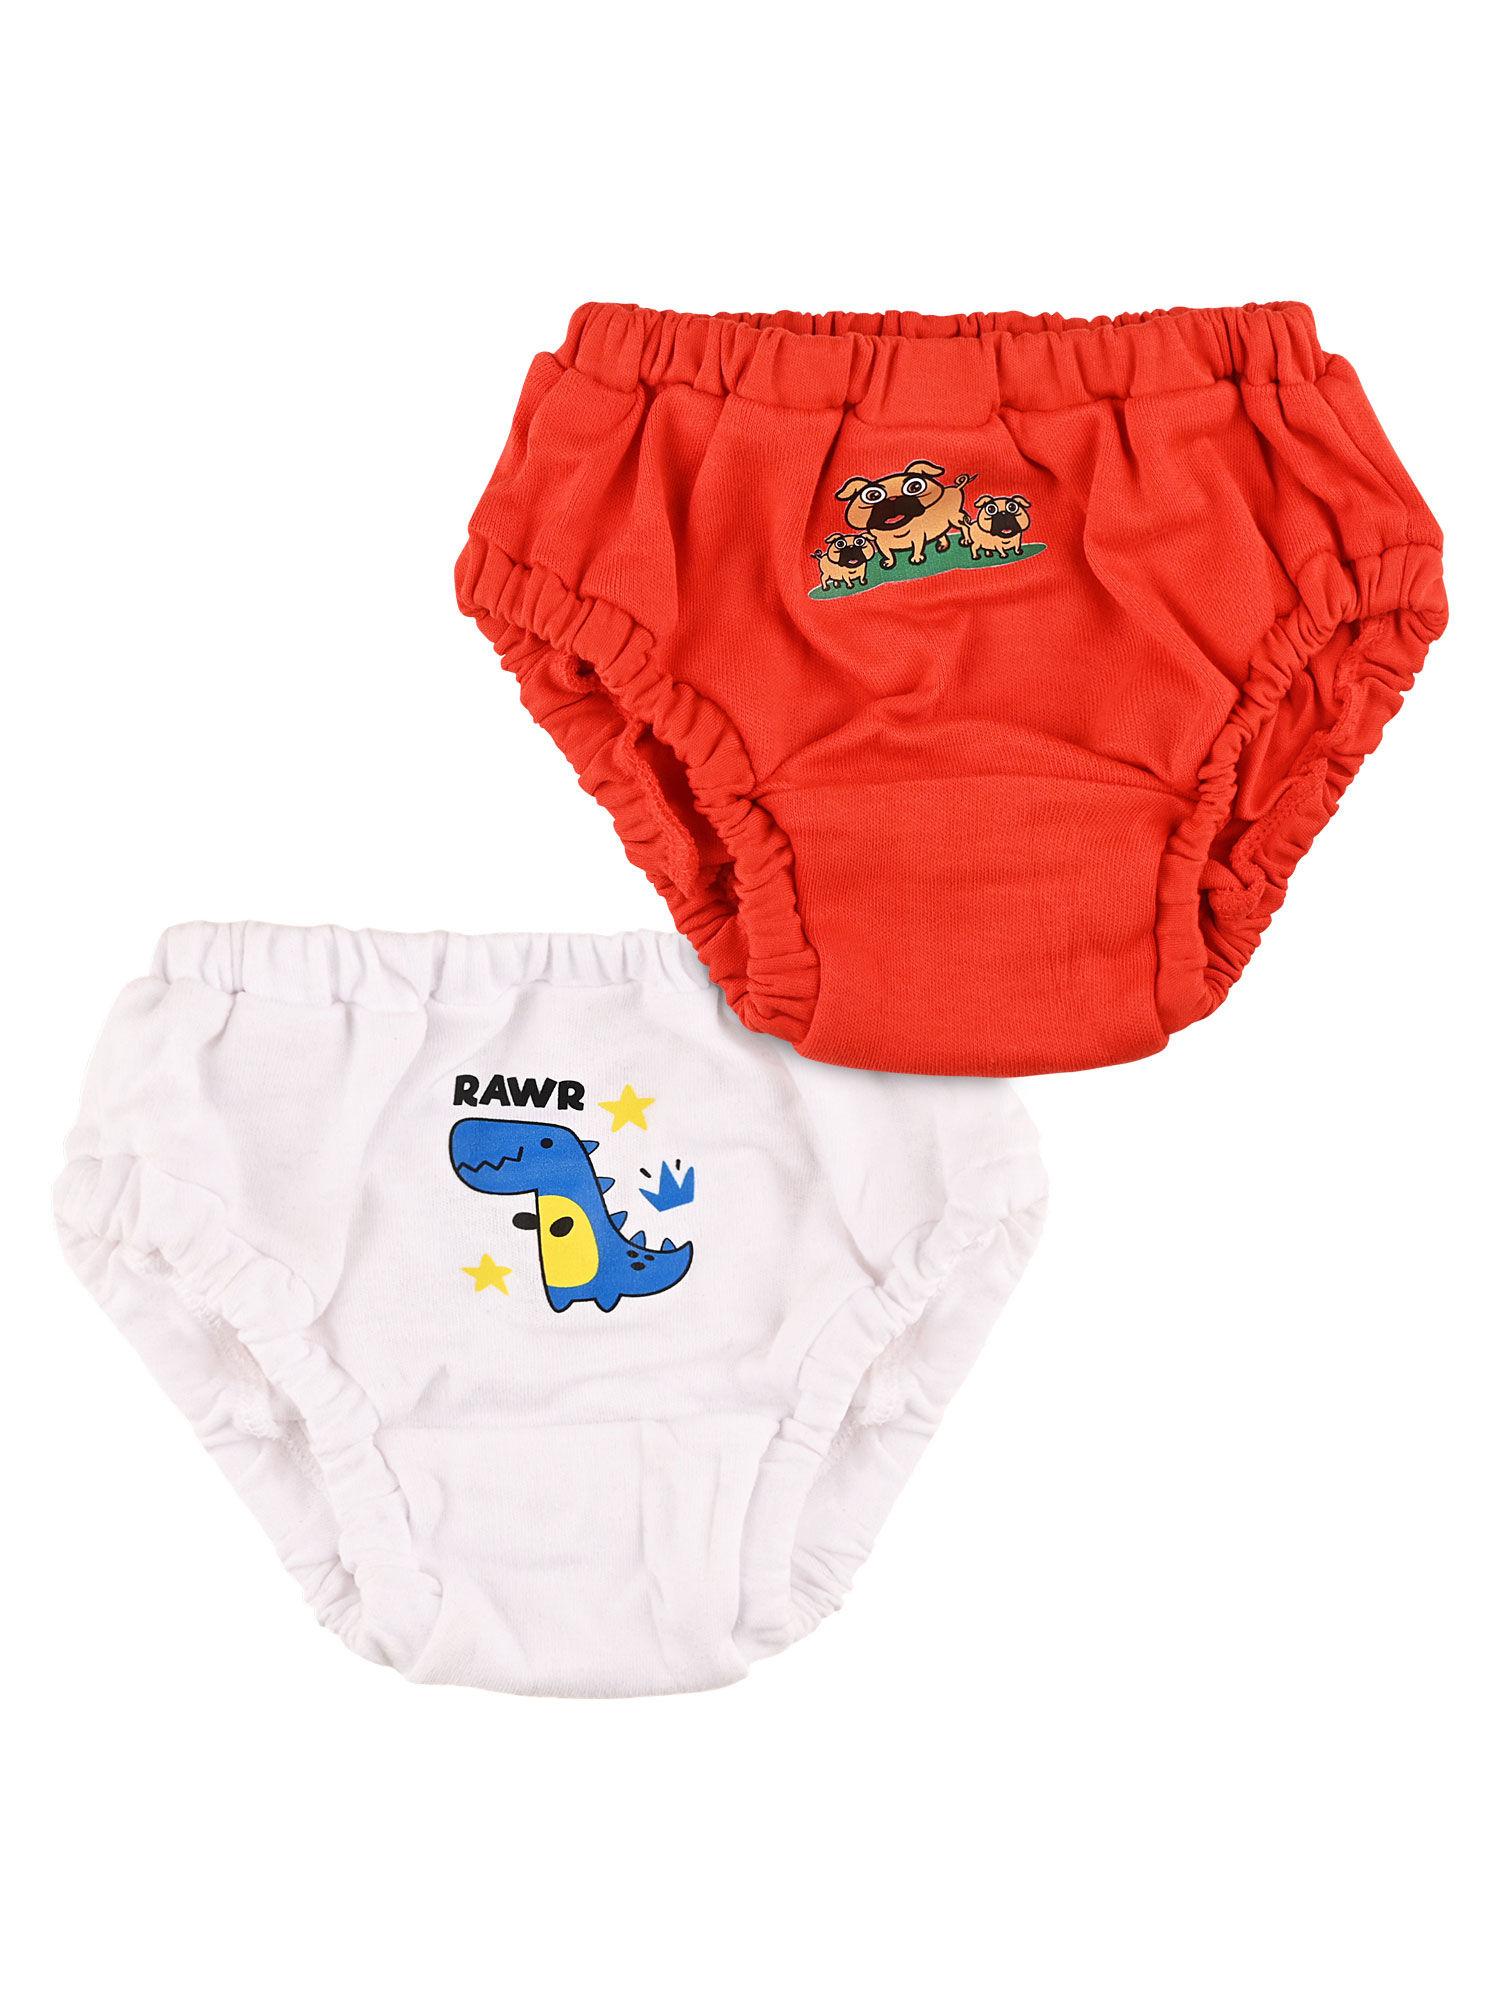 baby boys printed bloomer brief underwear red and white (pack of 2)